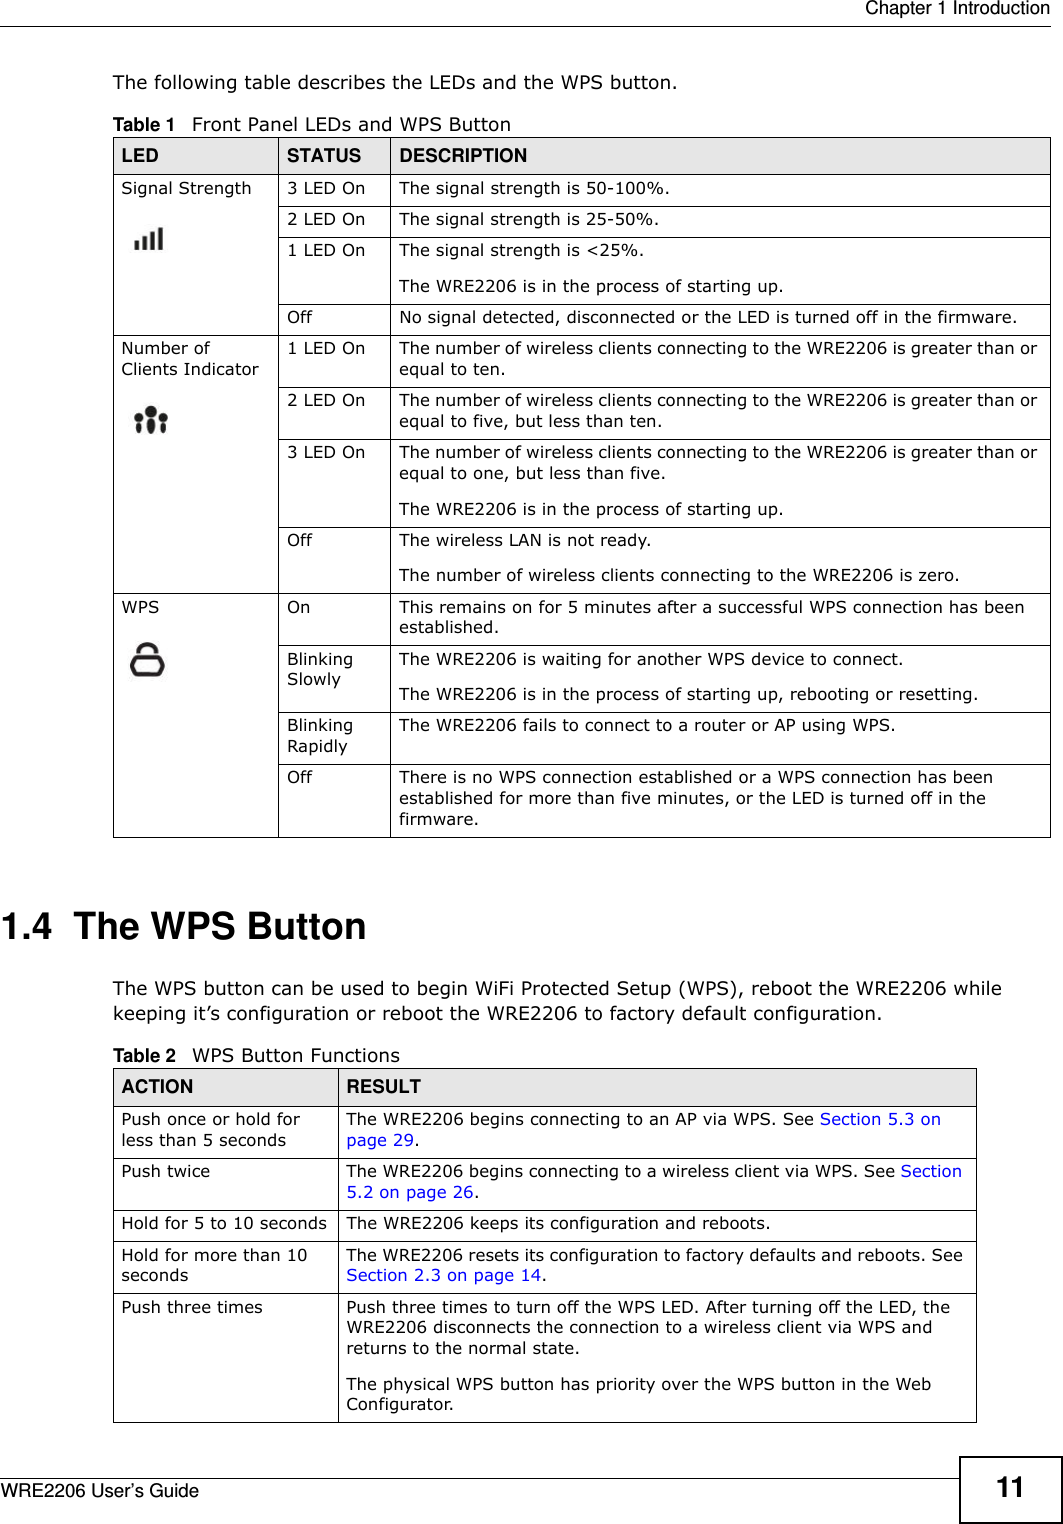  Chapter 1 IntroductionWRE2206 User’s Guide 11The following table describes the LEDs and the WPS button.1.4  The WPS ButtonThe WPS button can be used to begin WiFi Protected Setup (WPS), reboot the WRE2206 while keeping it’s configuration or reboot the WRE2206 to factory default configuration.Table 1   Front Panel LEDs and WPS ButtonLED STATUS DESCRIPTIONSignal Strength 3 LED On The signal strength is 50-100%.2 LED On The signal strength is 25-50%.1 LED On The signal strength is &lt;25%.The WRE2206 is in the process of starting up.Off No signal detected, disconnected or the LED is turned off in the firmware.Number of Clients Indicator1 LED On The number of wireless clients connecting to the WRE2206 is greater than or equal to ten.2 LED On The number of wireless clients connecting to the WRE2206 is greater than or equal to five, but less than ten.3 LED On The number of wireless clients connecting to the WRE2206 is greater than or equal to one, but less than five.The WRE2206 is in the process of starting up.Off The wireless LAN is not ready.The number of wireless clients connecting to the WRE2206 is zero.WPS On This remains on for 5 minutes after a successful WPS connection has been established.Blinking SlowlyThe WRE2206 is waiting for another WPS device to connect. The WRE2206 is in the process of starting up, rebooting or resetting.Blinking RapidlyThe WRE2206 fails to connect to a router or AP using WPS.Off There is no WPS connection established or a WPS connection has been established for more than five minutes, or the LED is turned off in the firmware.Table 2   WPS Button FunctionsACTION RESULTPush once or hold for less than 5 secondsThe WRE2206 begins connecting to an AP via WPS. See Section 5.3 on page 29.Push twice The WRE2206 begins connecting to a wireless client via WPS. See Section 5.2 on page 26.Hold for 5 to 10 seconds The WRE2206 keeps its configuration and reboots.Hold for more than 10 secondsThe WRE2206 resets its configuration to factory defaults and reboots. See Section 2.3 on page 14.Push three times  Push three times to turn off the WPS LED. After turning off the LED, the WRE2206 disconnects the connection to a wireless client via WPS and returns to the normal state. The physical WPS button has priority over the WPS button in the Web Configurator.